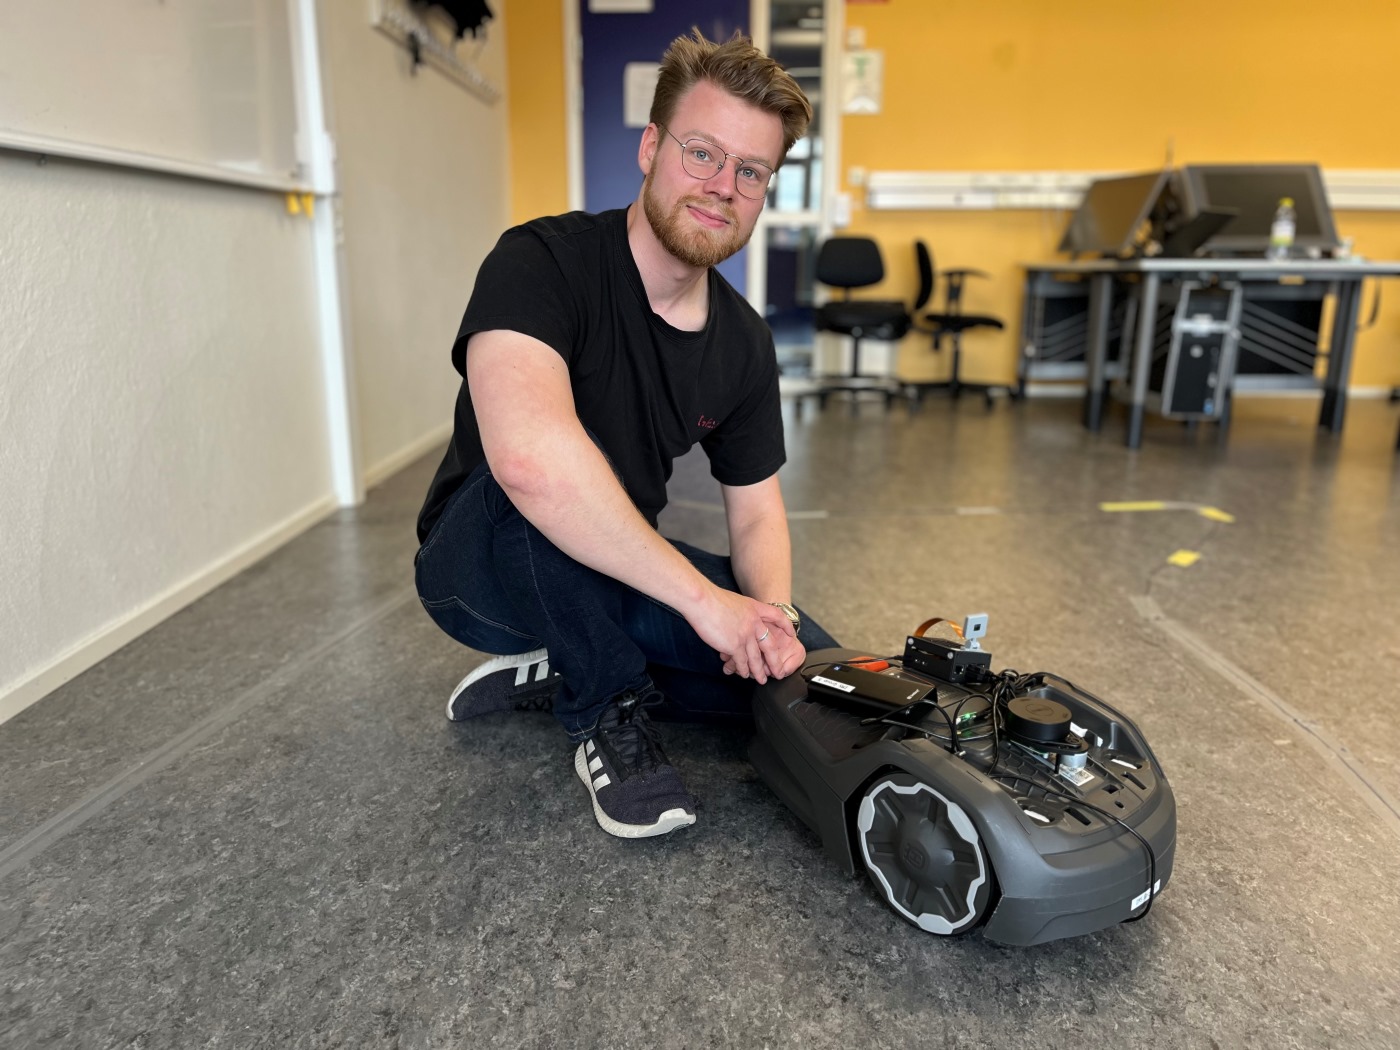 Student at the School of Engineering and a Husqvarna Automower.